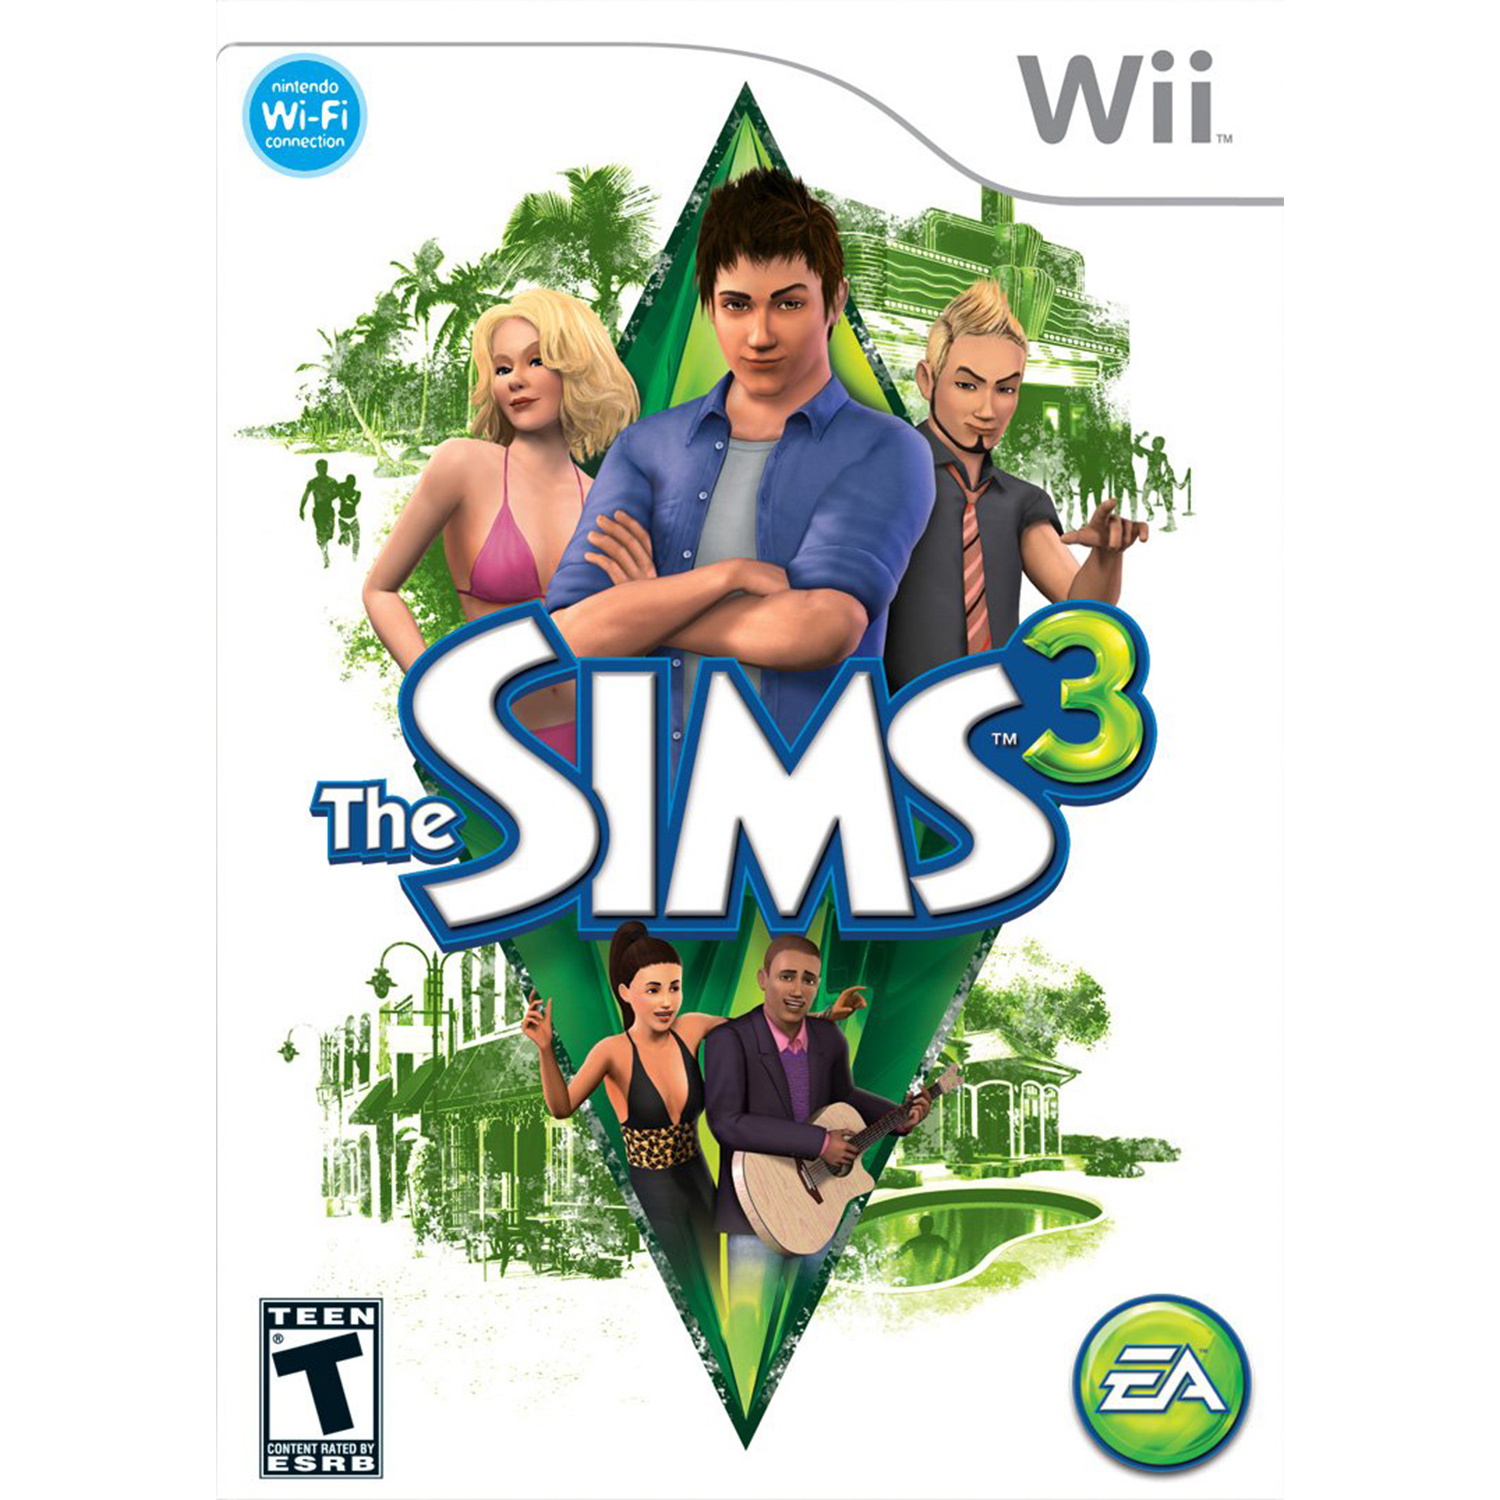 The Sims 3 Nintendo Wii